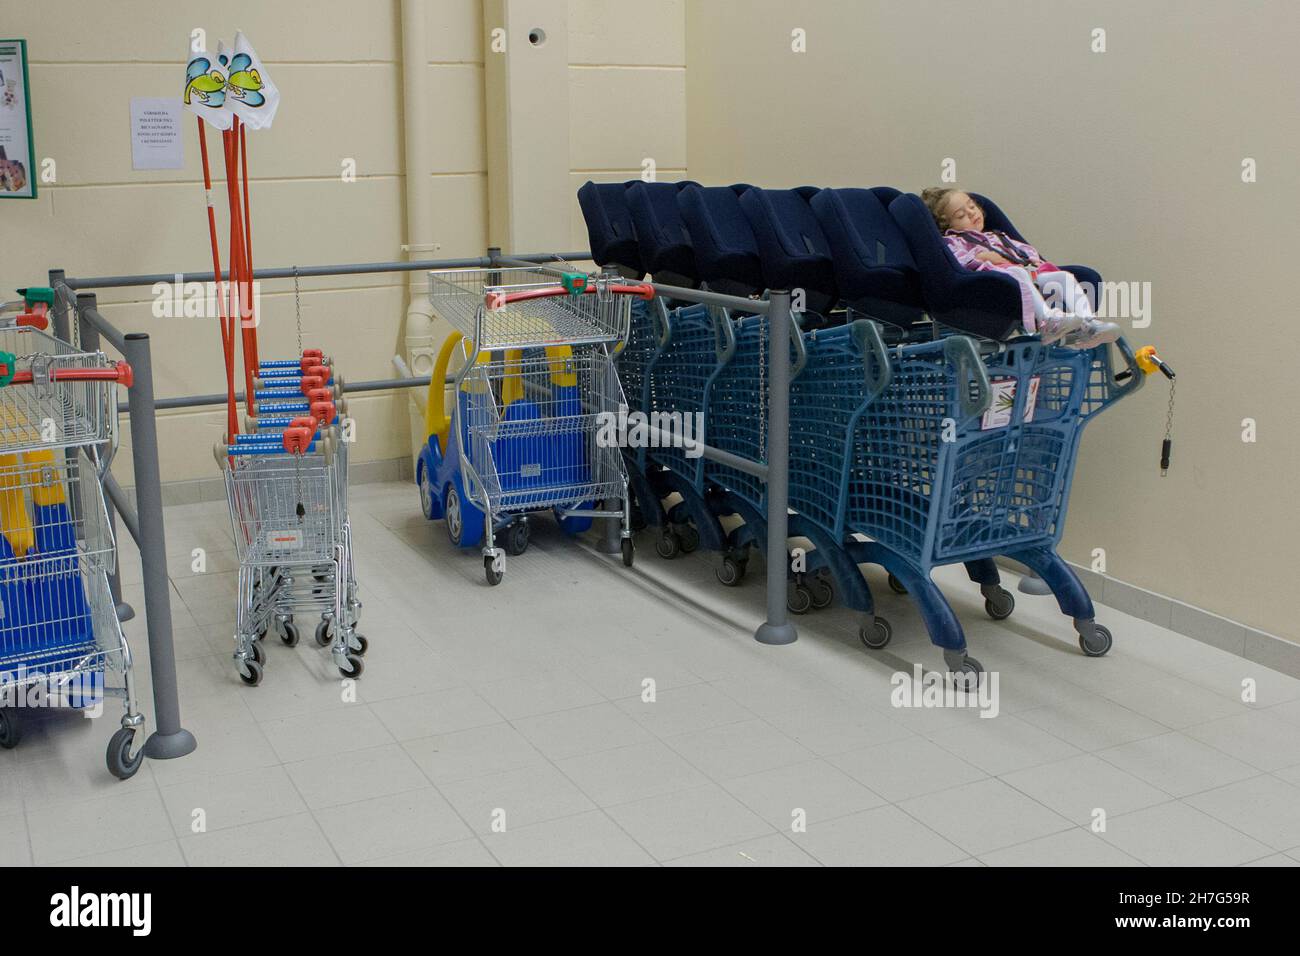 A lonely child among shopping carts. Stock Photo